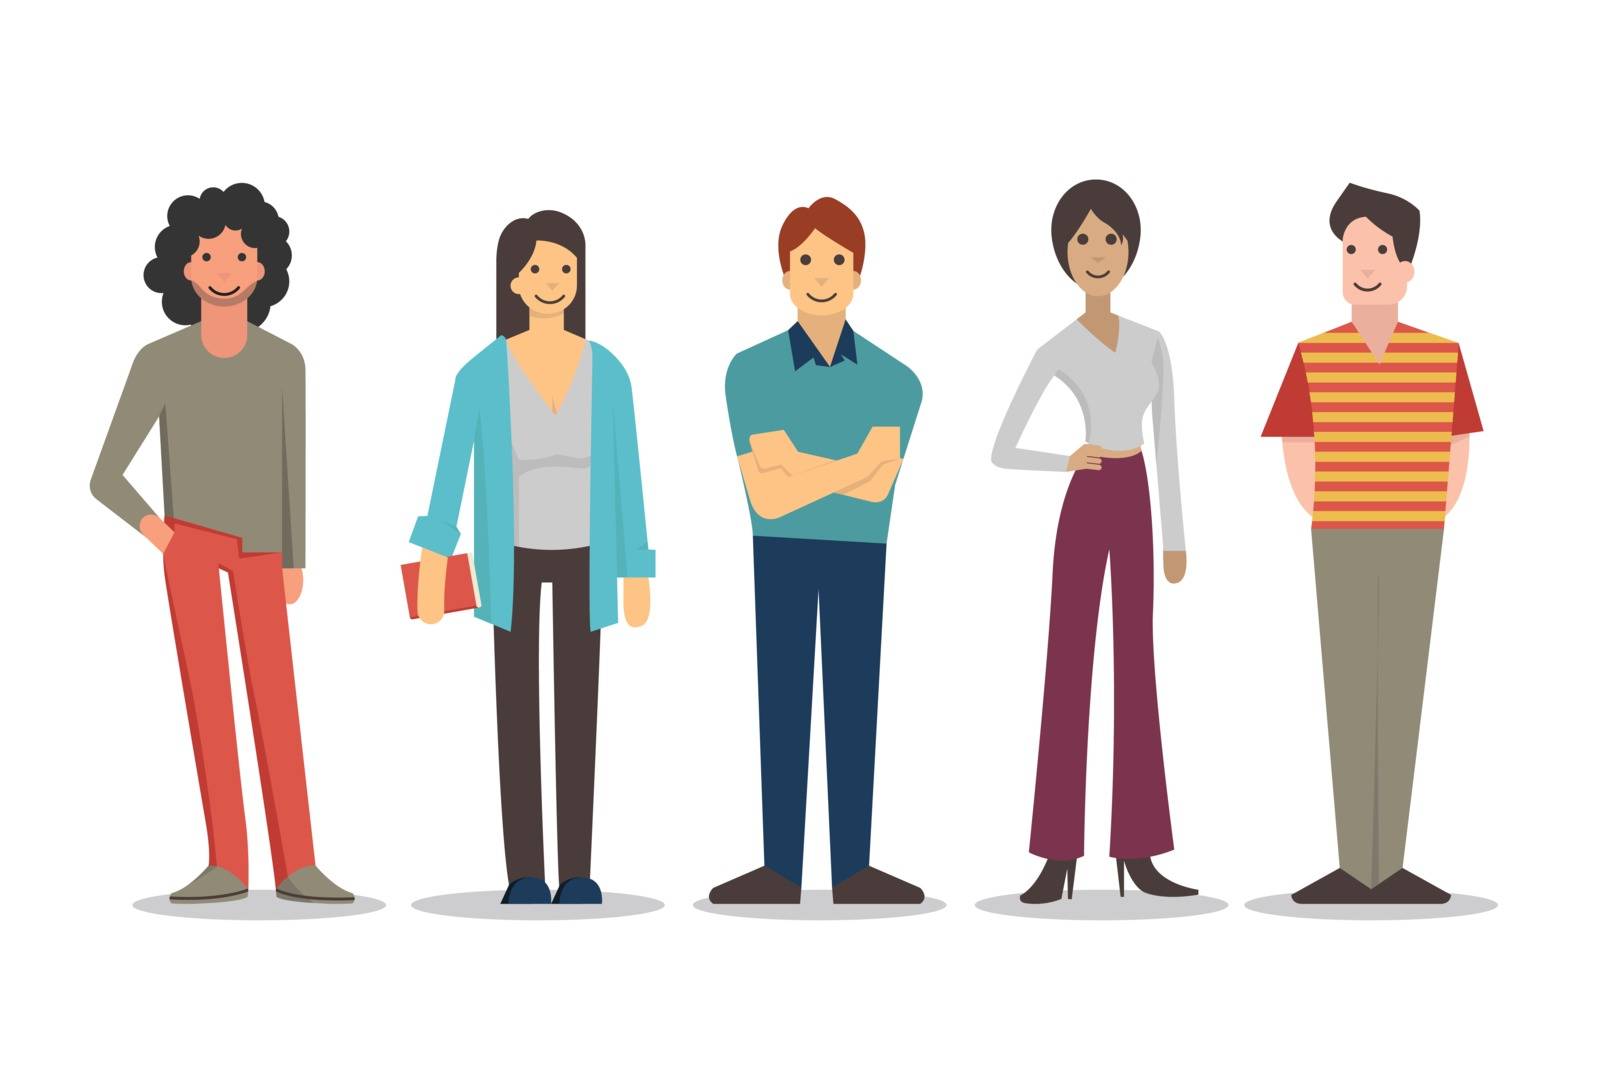 Cartoon characters of young people in various lifestyle, standing and smiling in casual dresses. Flat design, isolated on white. 